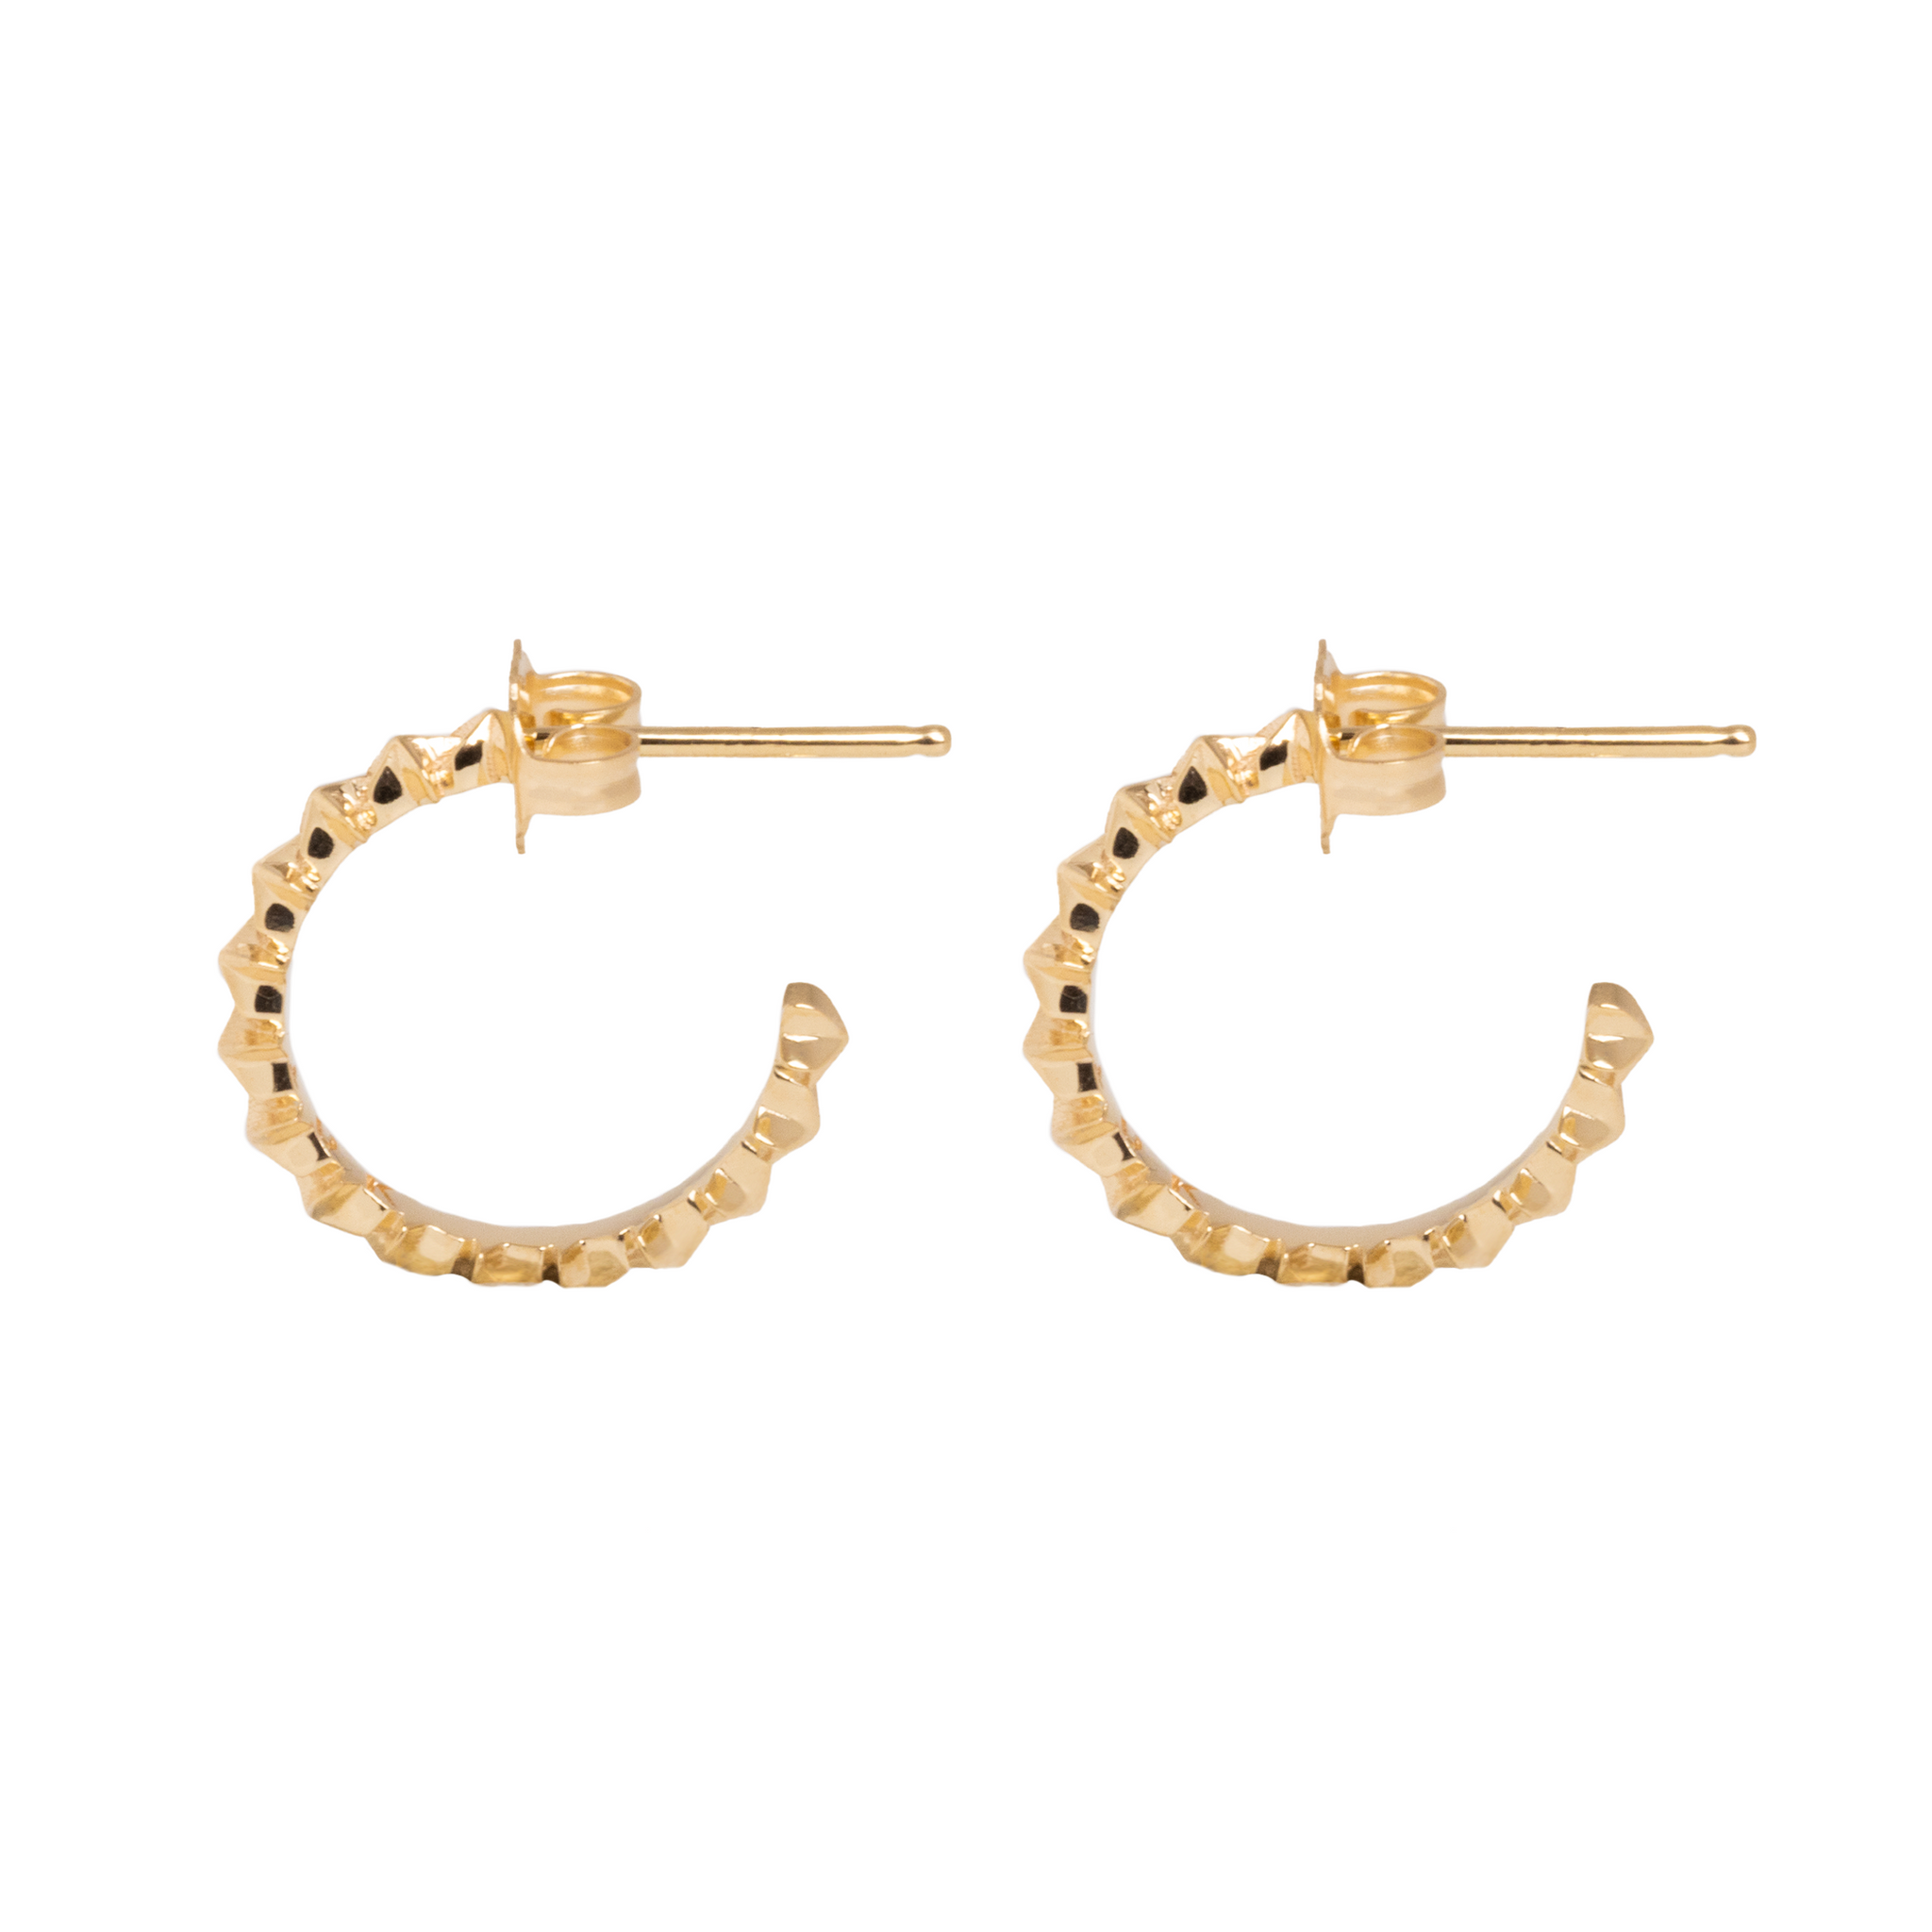 10K Gold Super Micro Star Earrings on white background side view